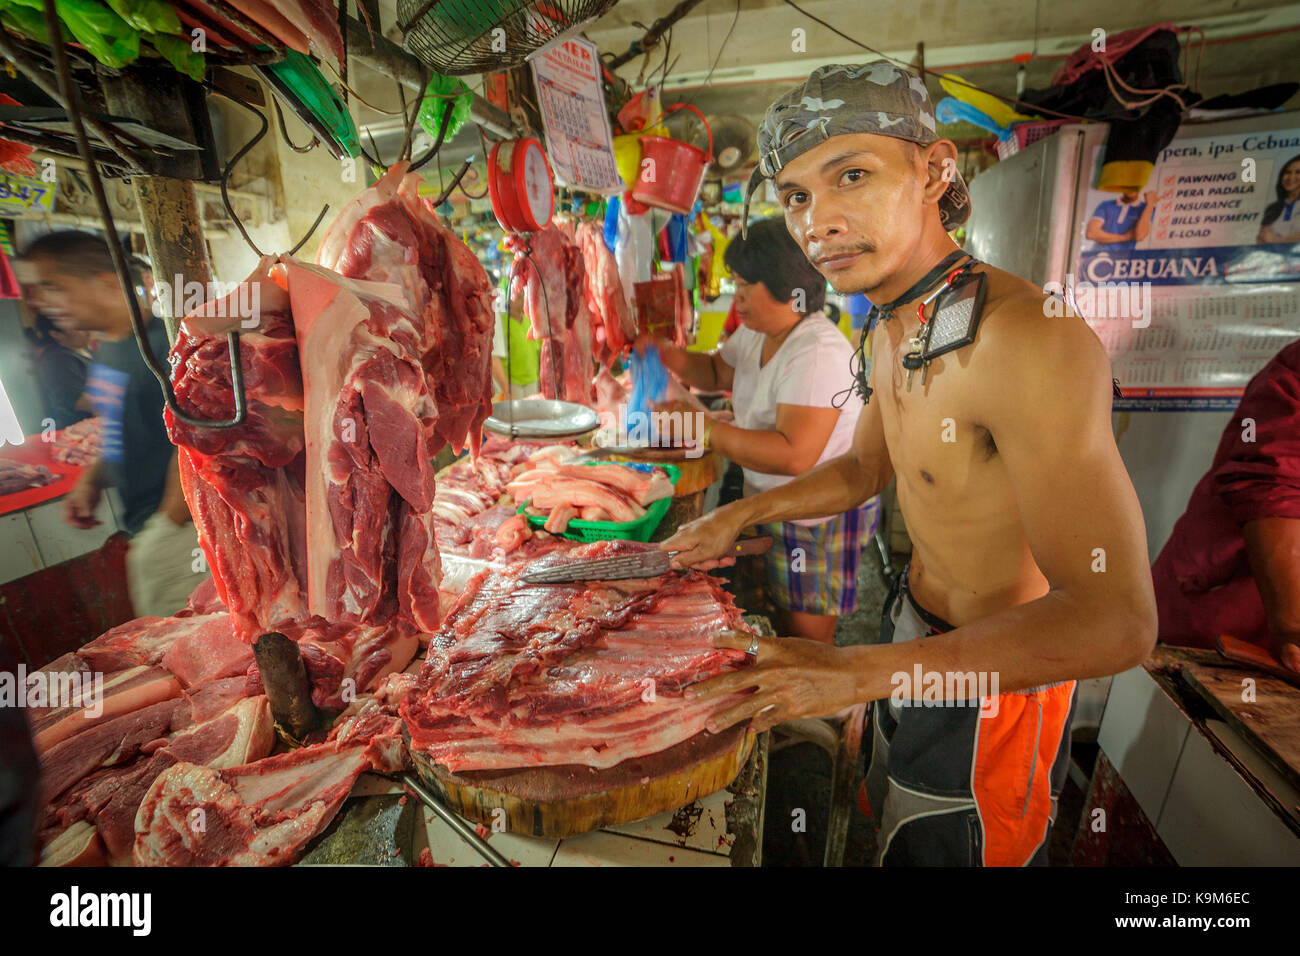 A Filipino man butchers raw pork at his stall in the meat market at Puerto Princesa, Palawan Island, Philippines, Southeast Asia. Stock Photo